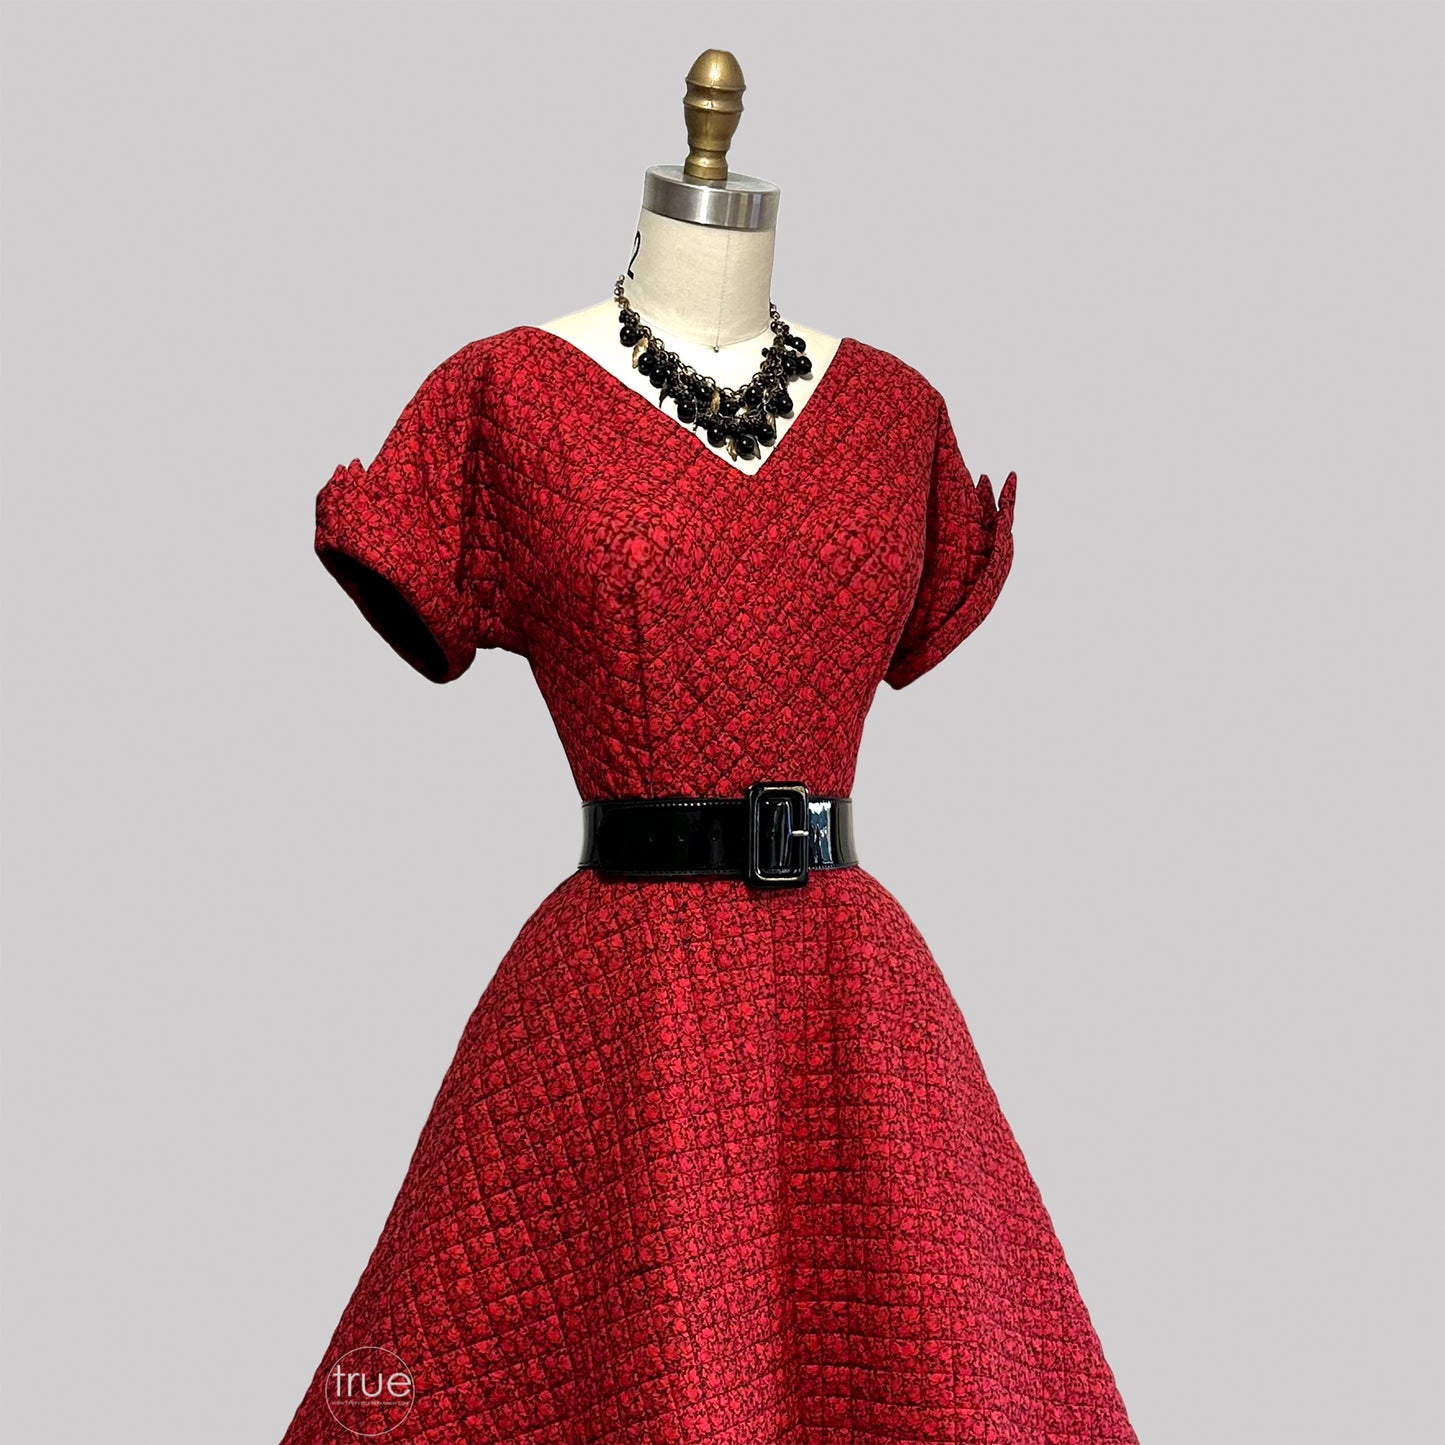 vintage 1950's dress ...quintessential JONATHAN LOGAN red & black floral quilted dress